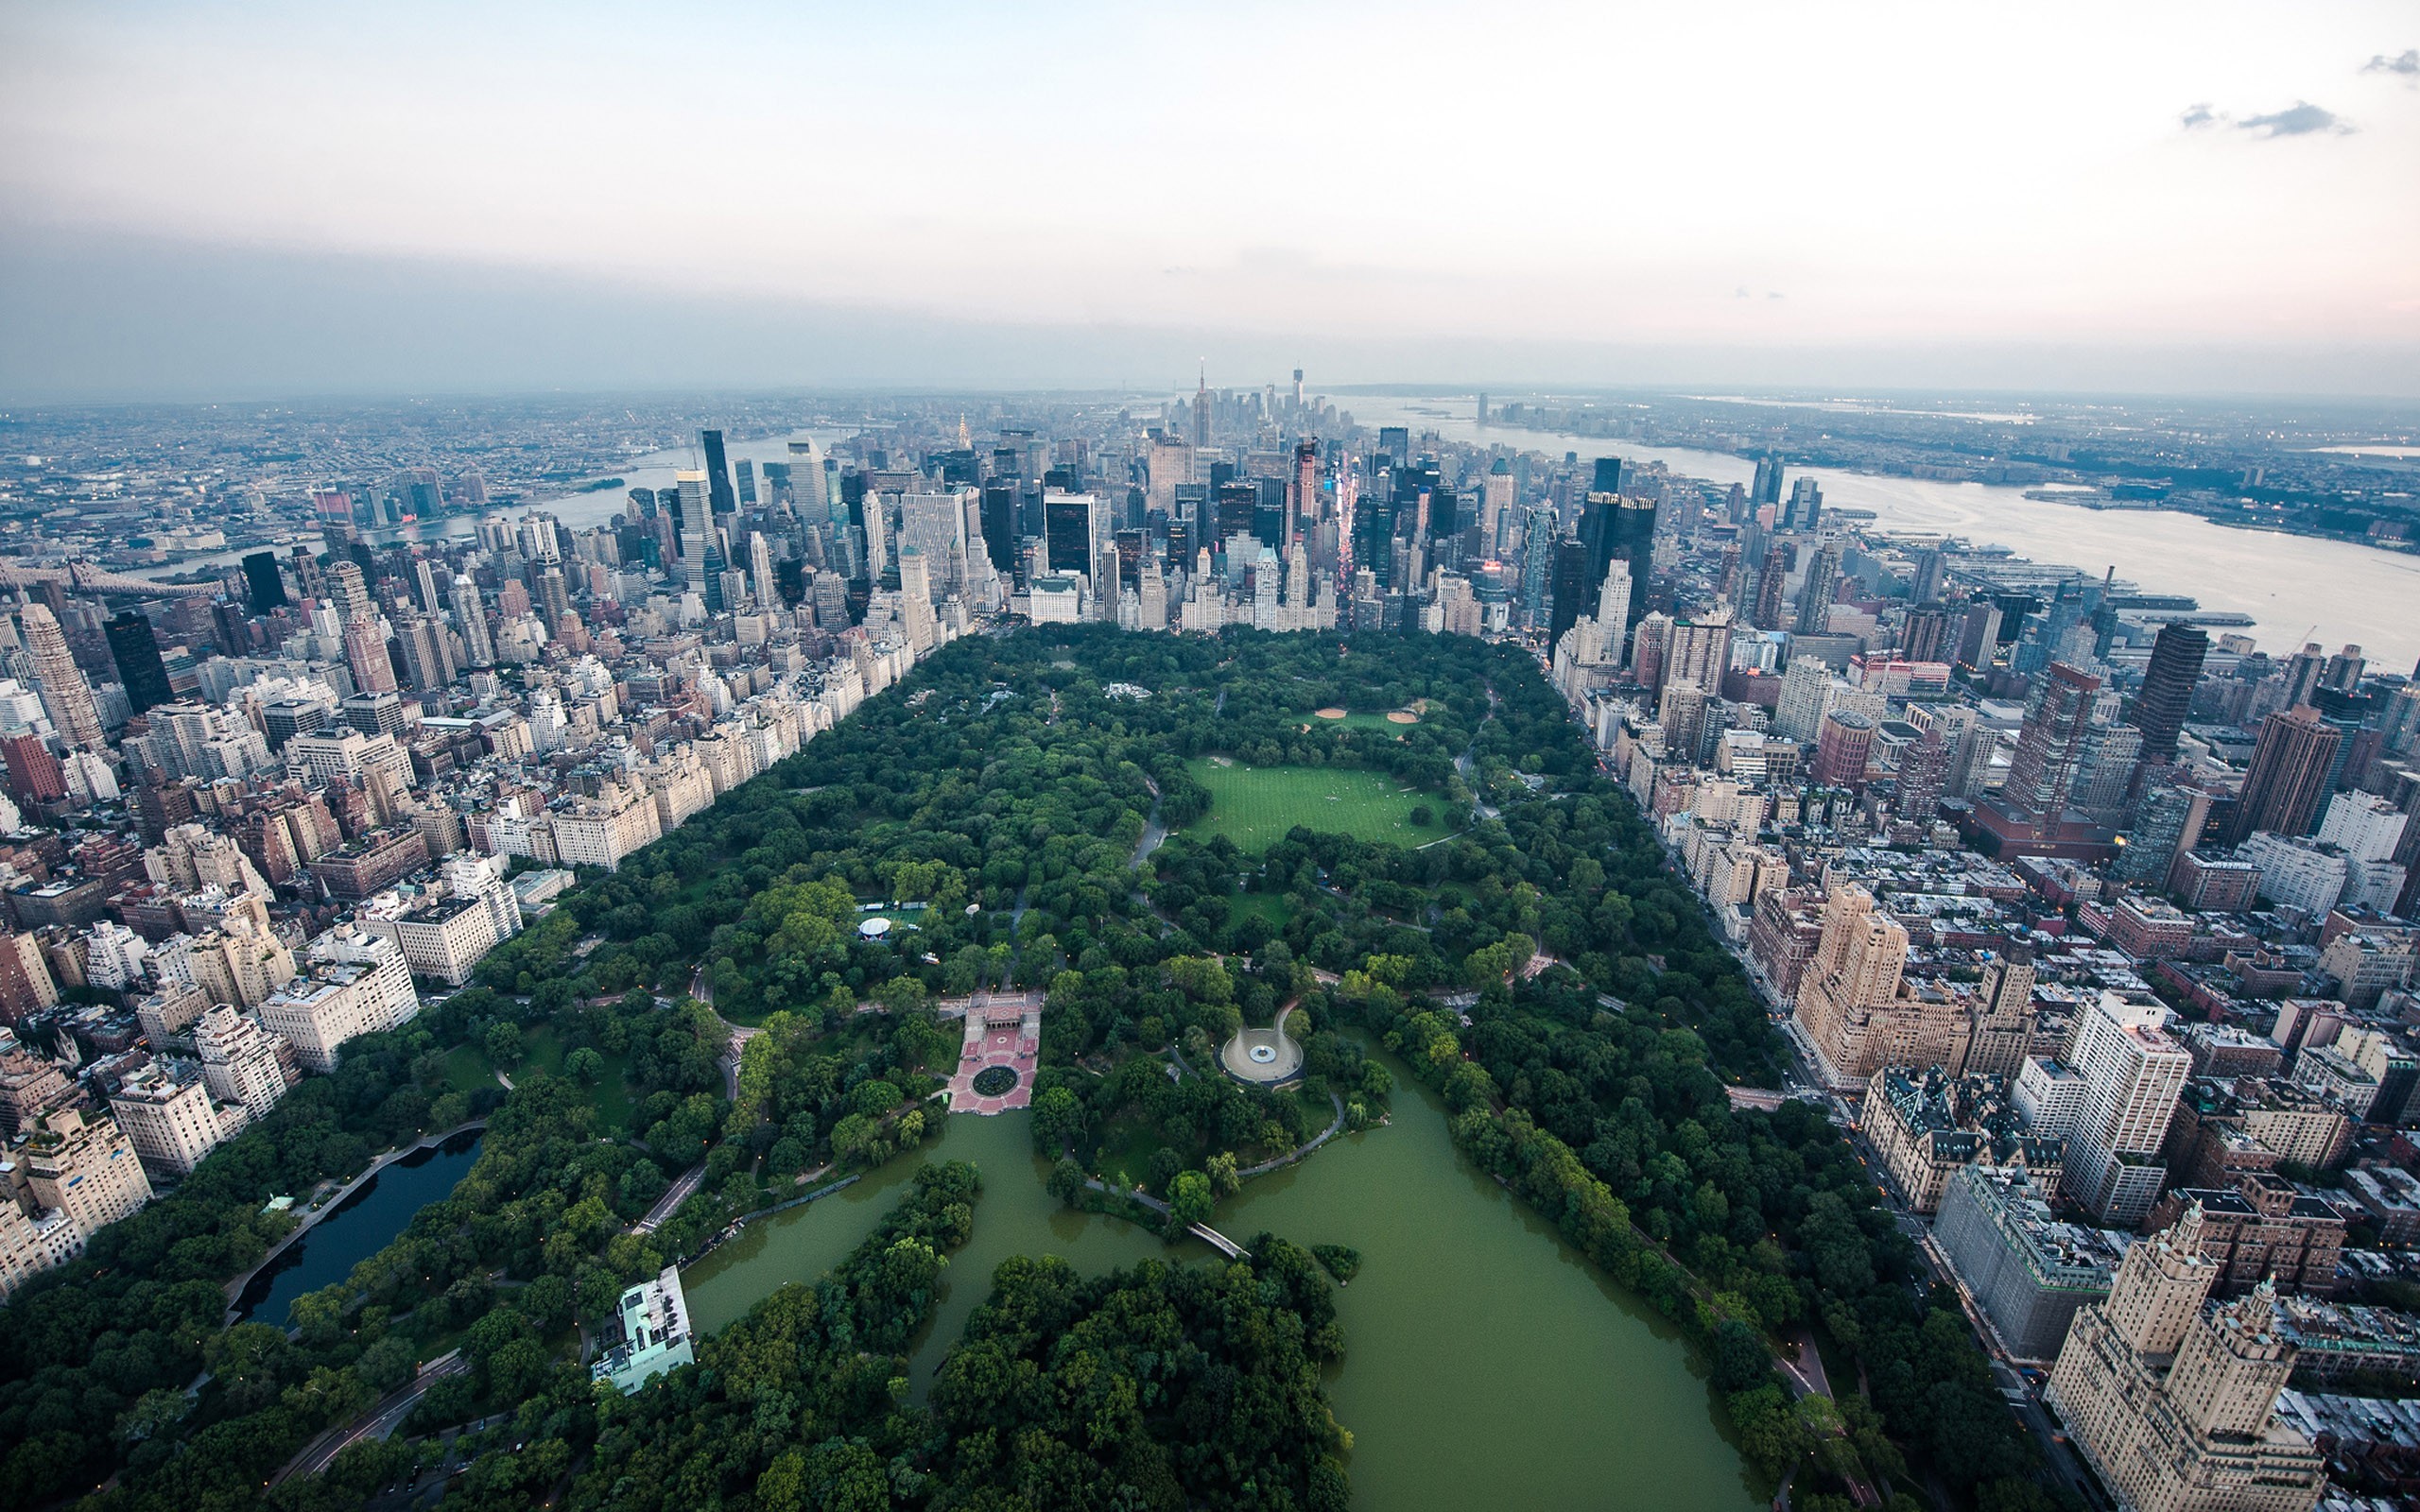 General 2560x1600 Central Park New York City cityscape park USA aerial view